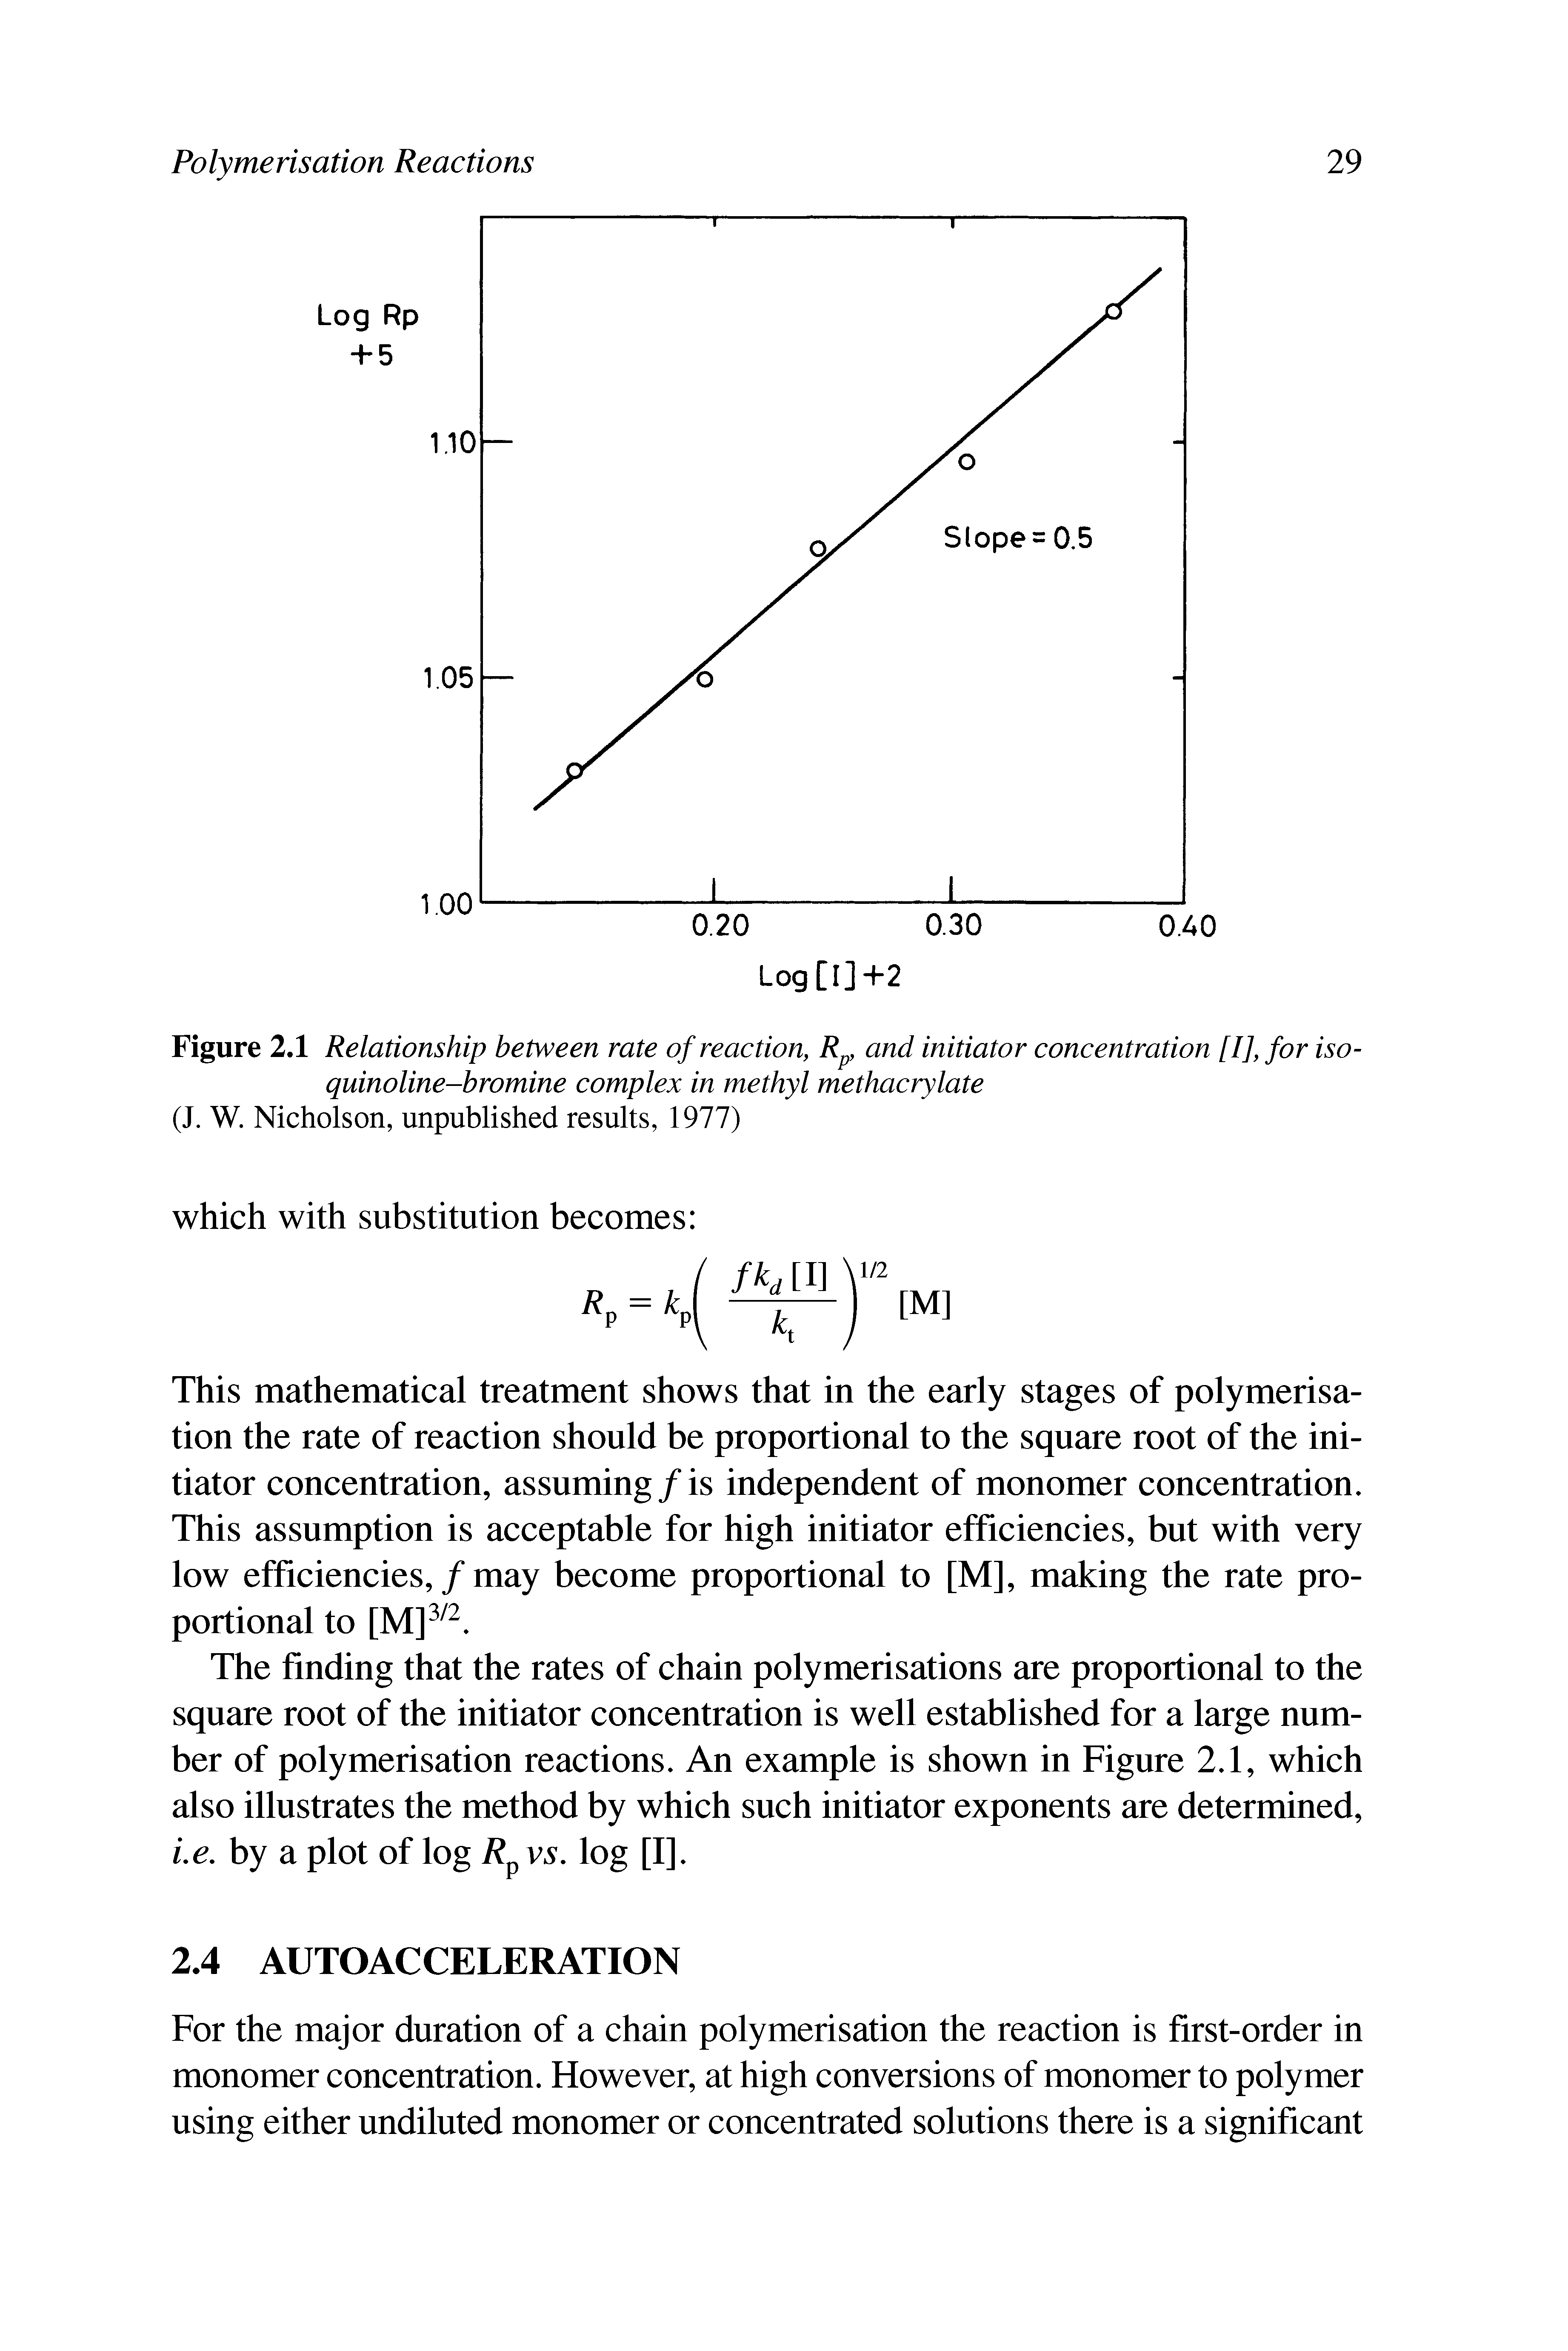 Figure 2.1 Relationship between rate of reaction, Rp, and initiator concentration [I], for isoquinoline-bromine complex in methyl methacrylate (J. W. Nicholson, unpublished results, 1977)...